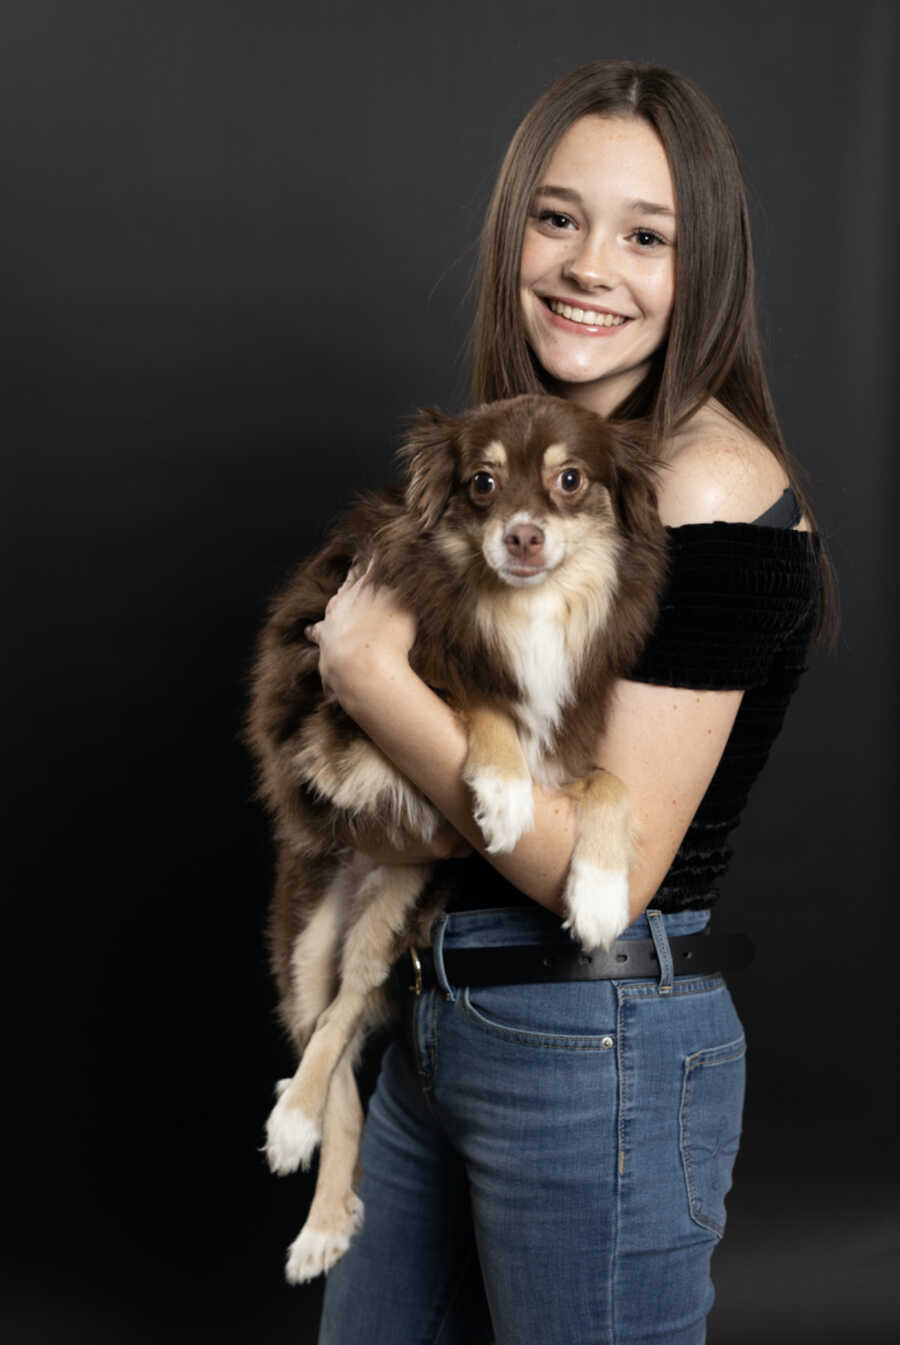 Adopted teen holds pet dog and poses for professional photo.